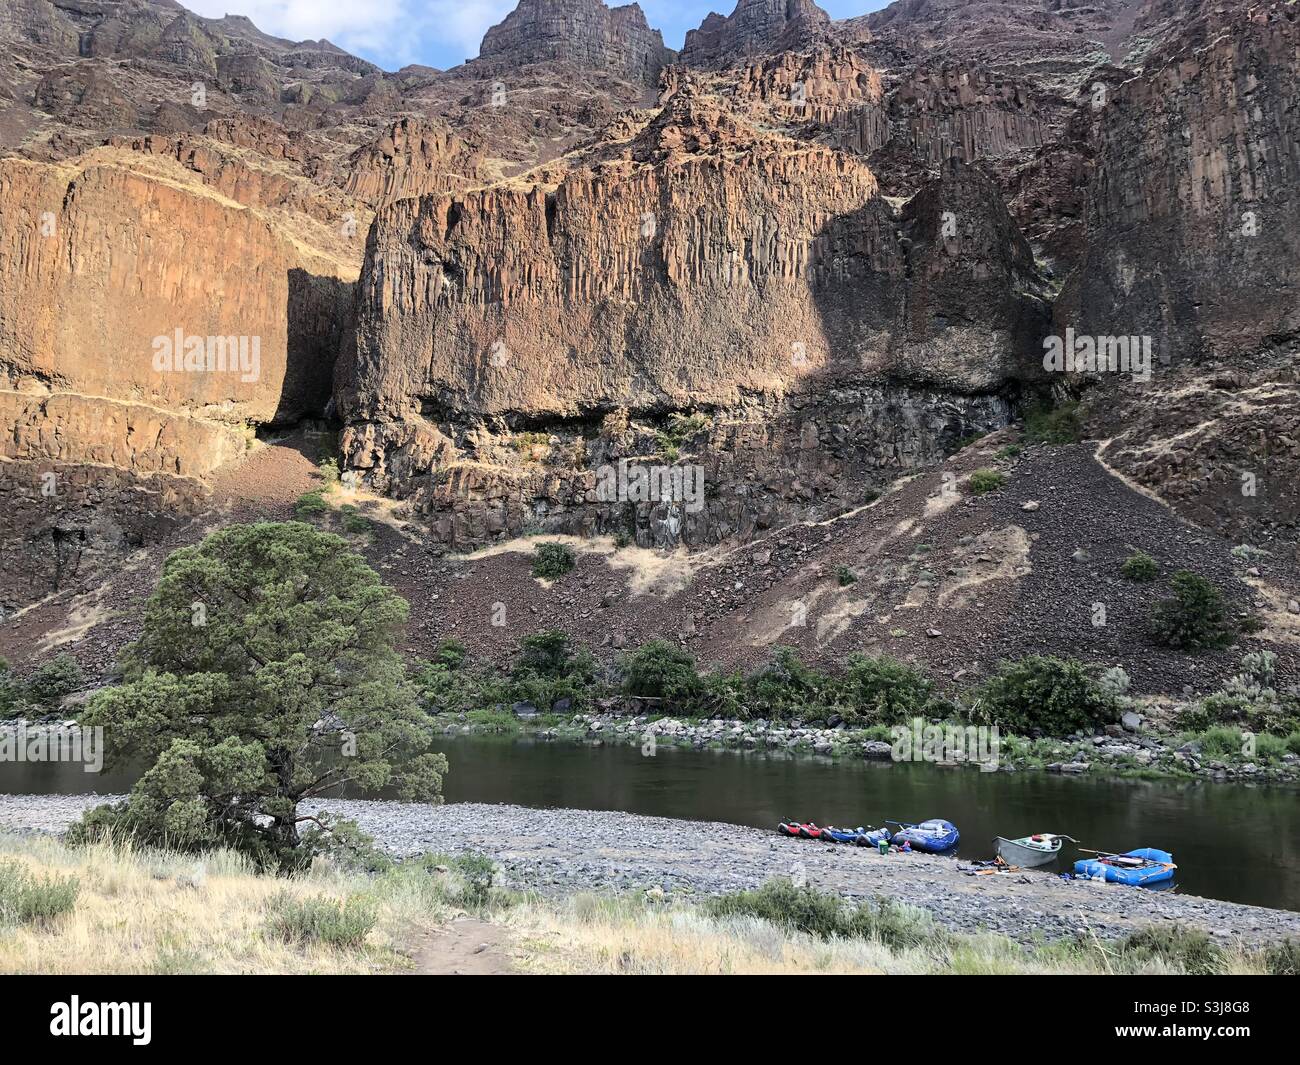 Boats on the shore below large cliffs on the John Day River in central Oregon. Stock Photo